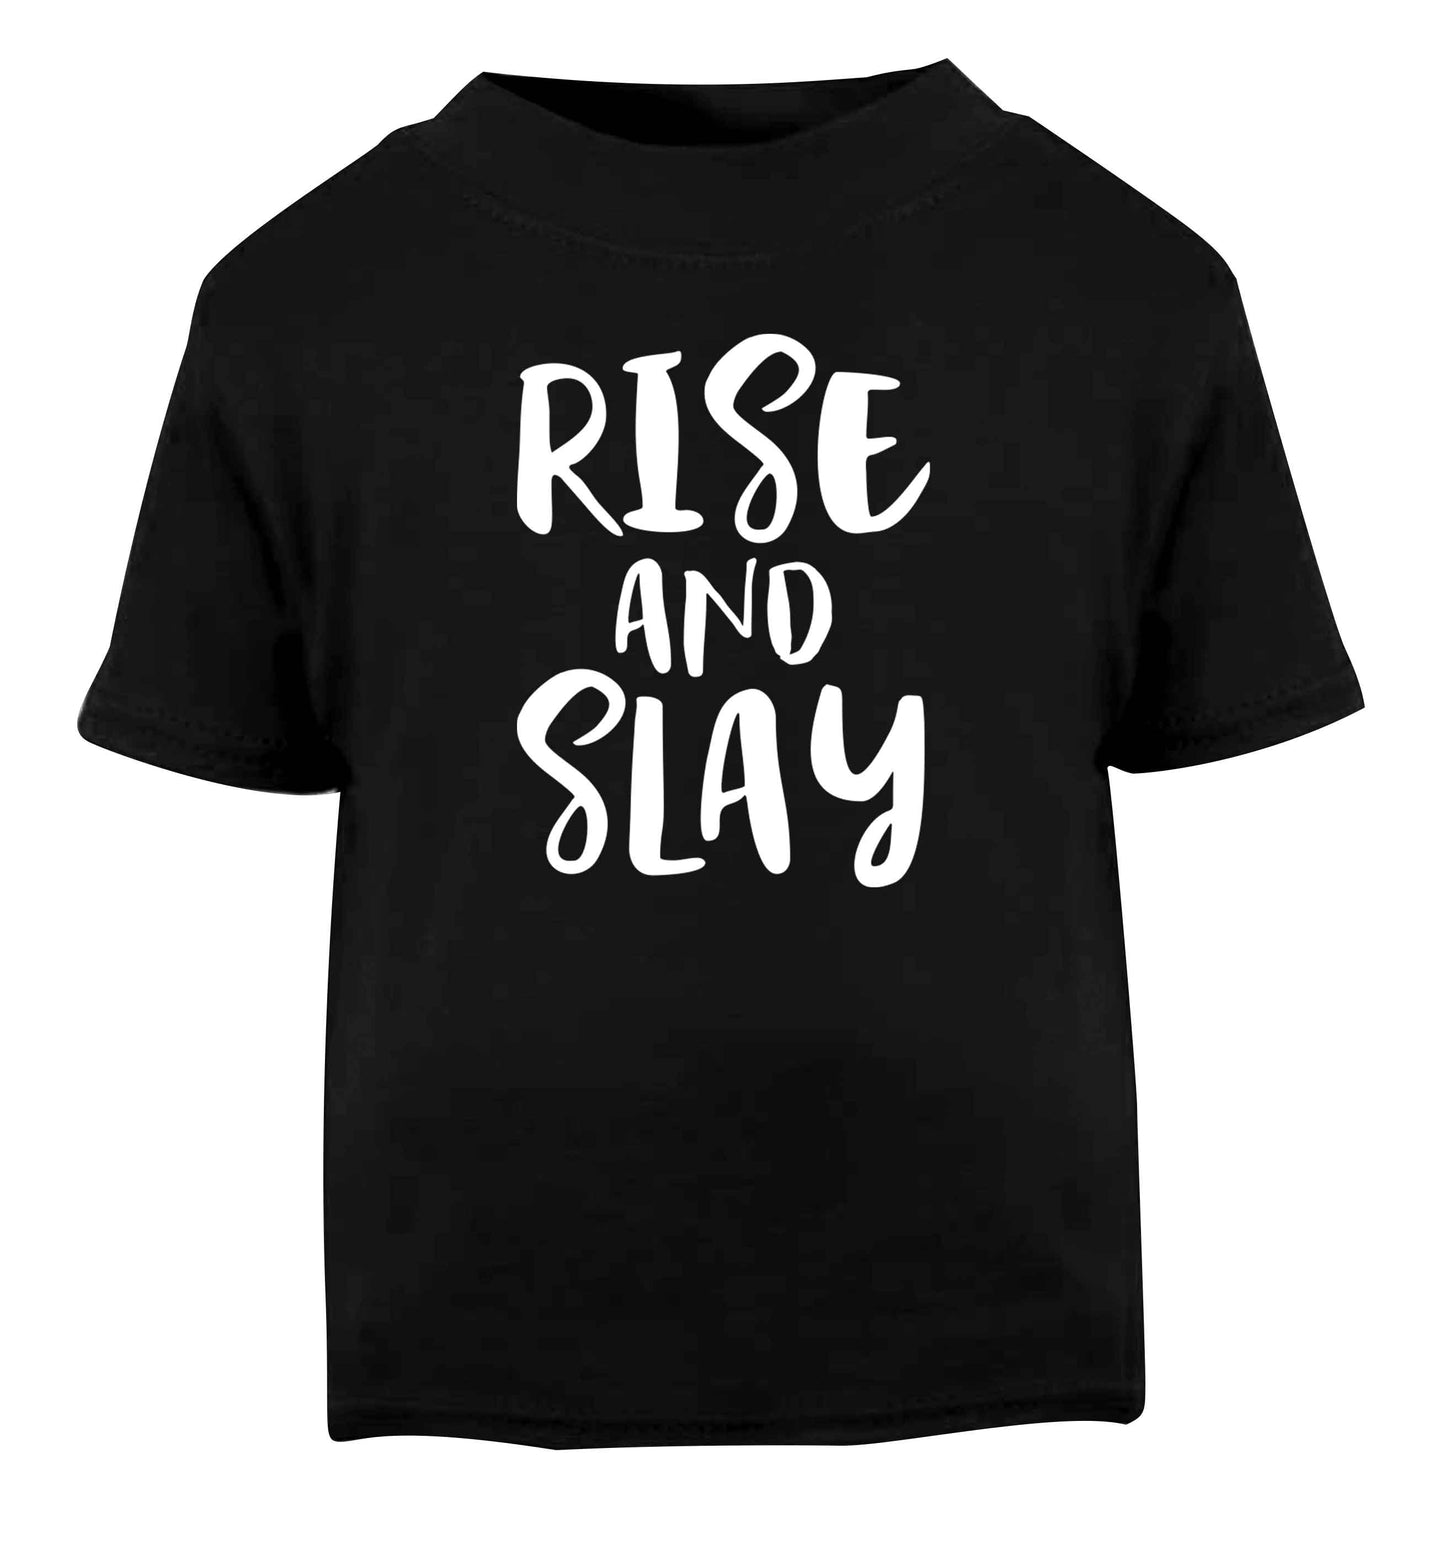 Rise and slay Black Baby Toddler Tshirt 2 years